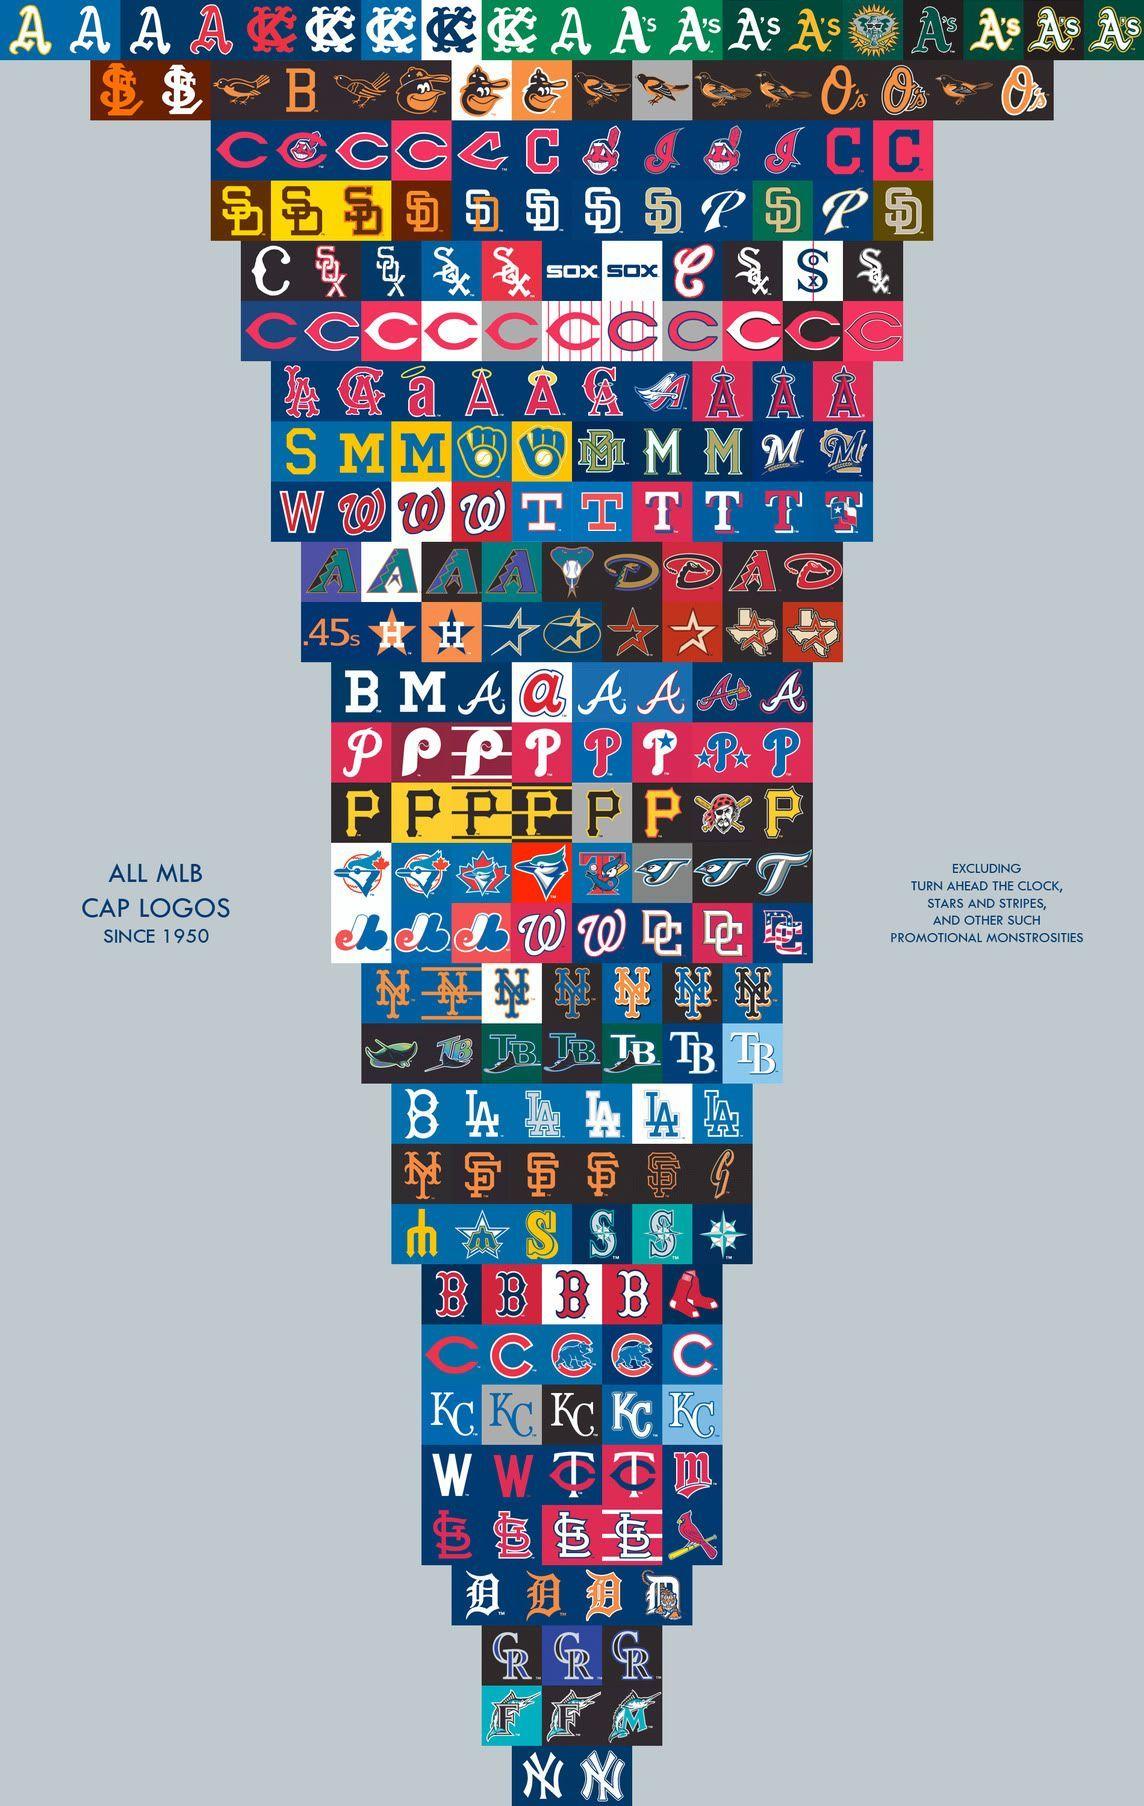 Cool MLB Logo - All the different permutations of every MLB logo over the years ...